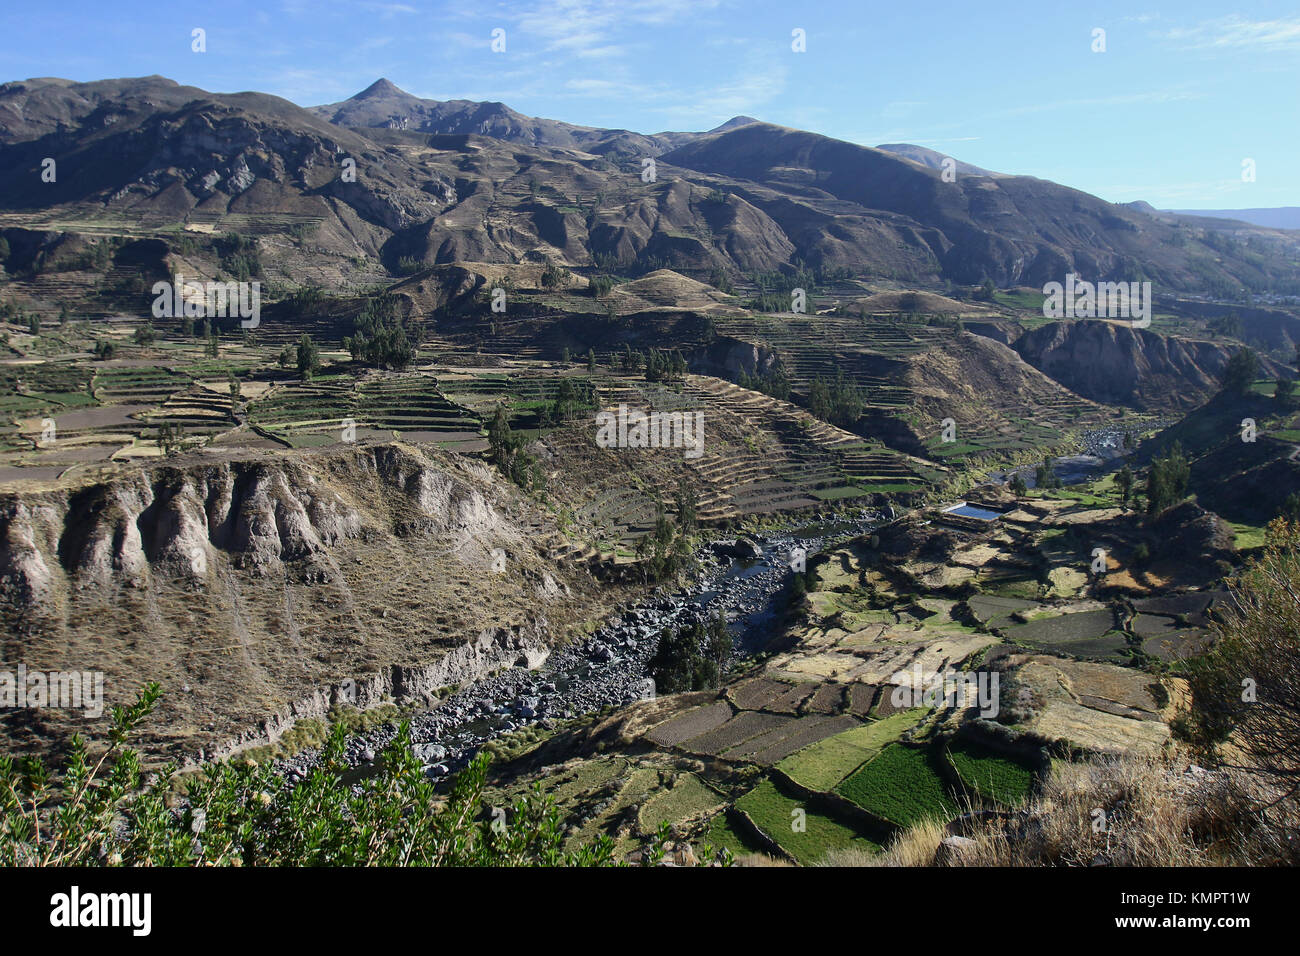 Maca ( Peru) November, 18 th 2015; Landscape of the Colca Canyon in the Andes Cordilleras with terraced fields for crops. Credit: Sebastien Lapeyrere/Alamy Live News. Stock Photo